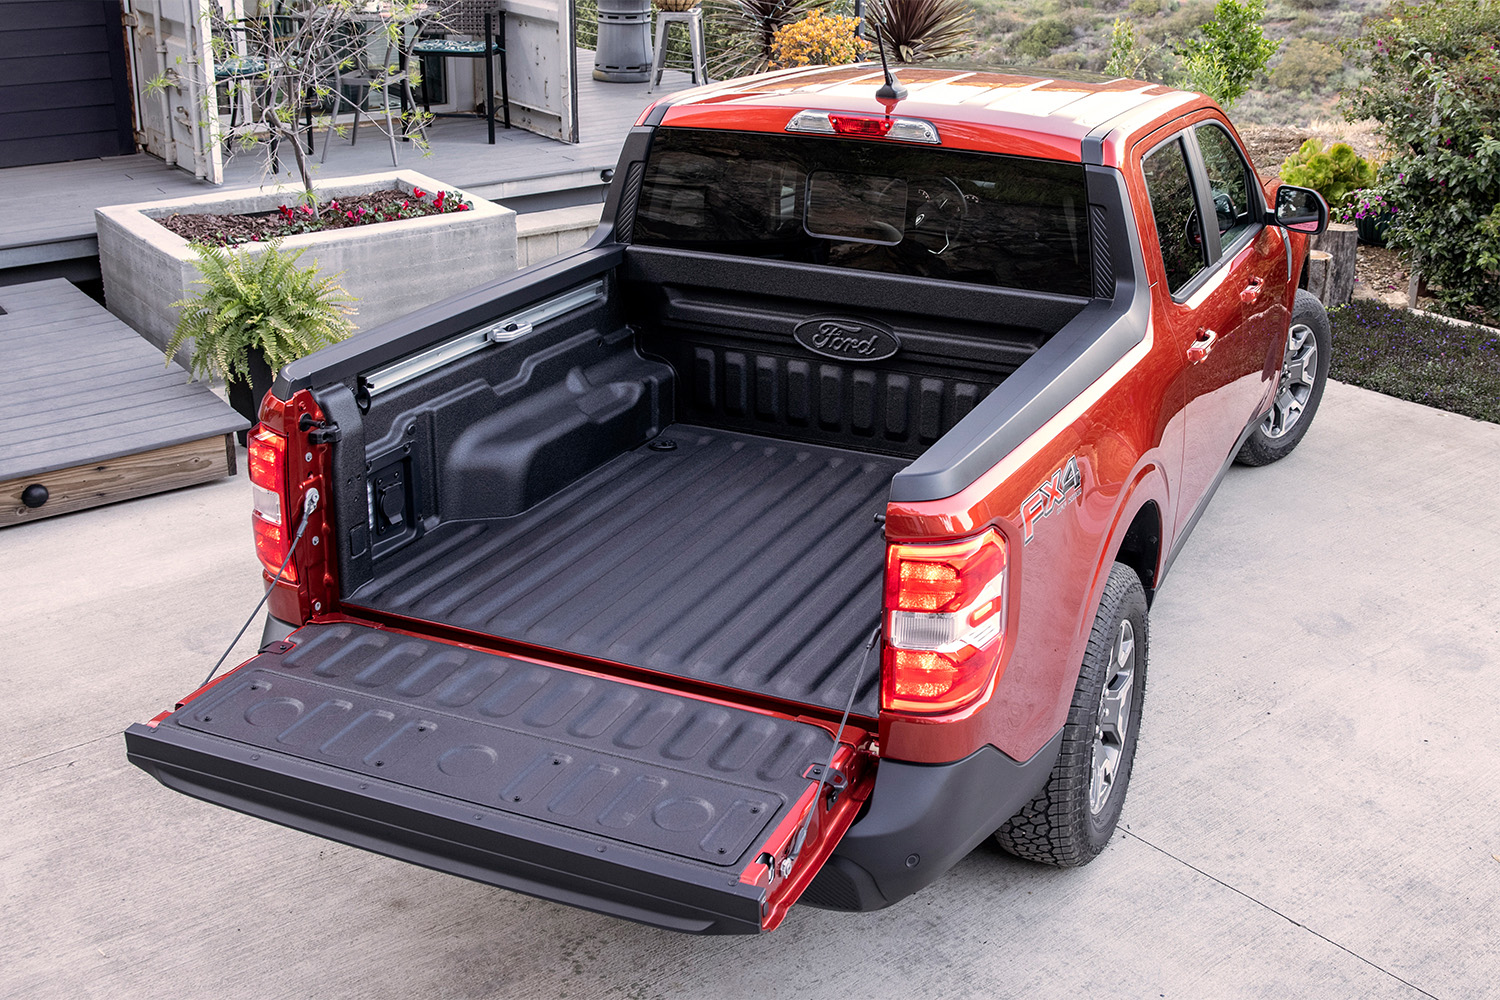 The truck bed in the 2022 Ford Maverick Lariat. It's not huge, but it's not small either.